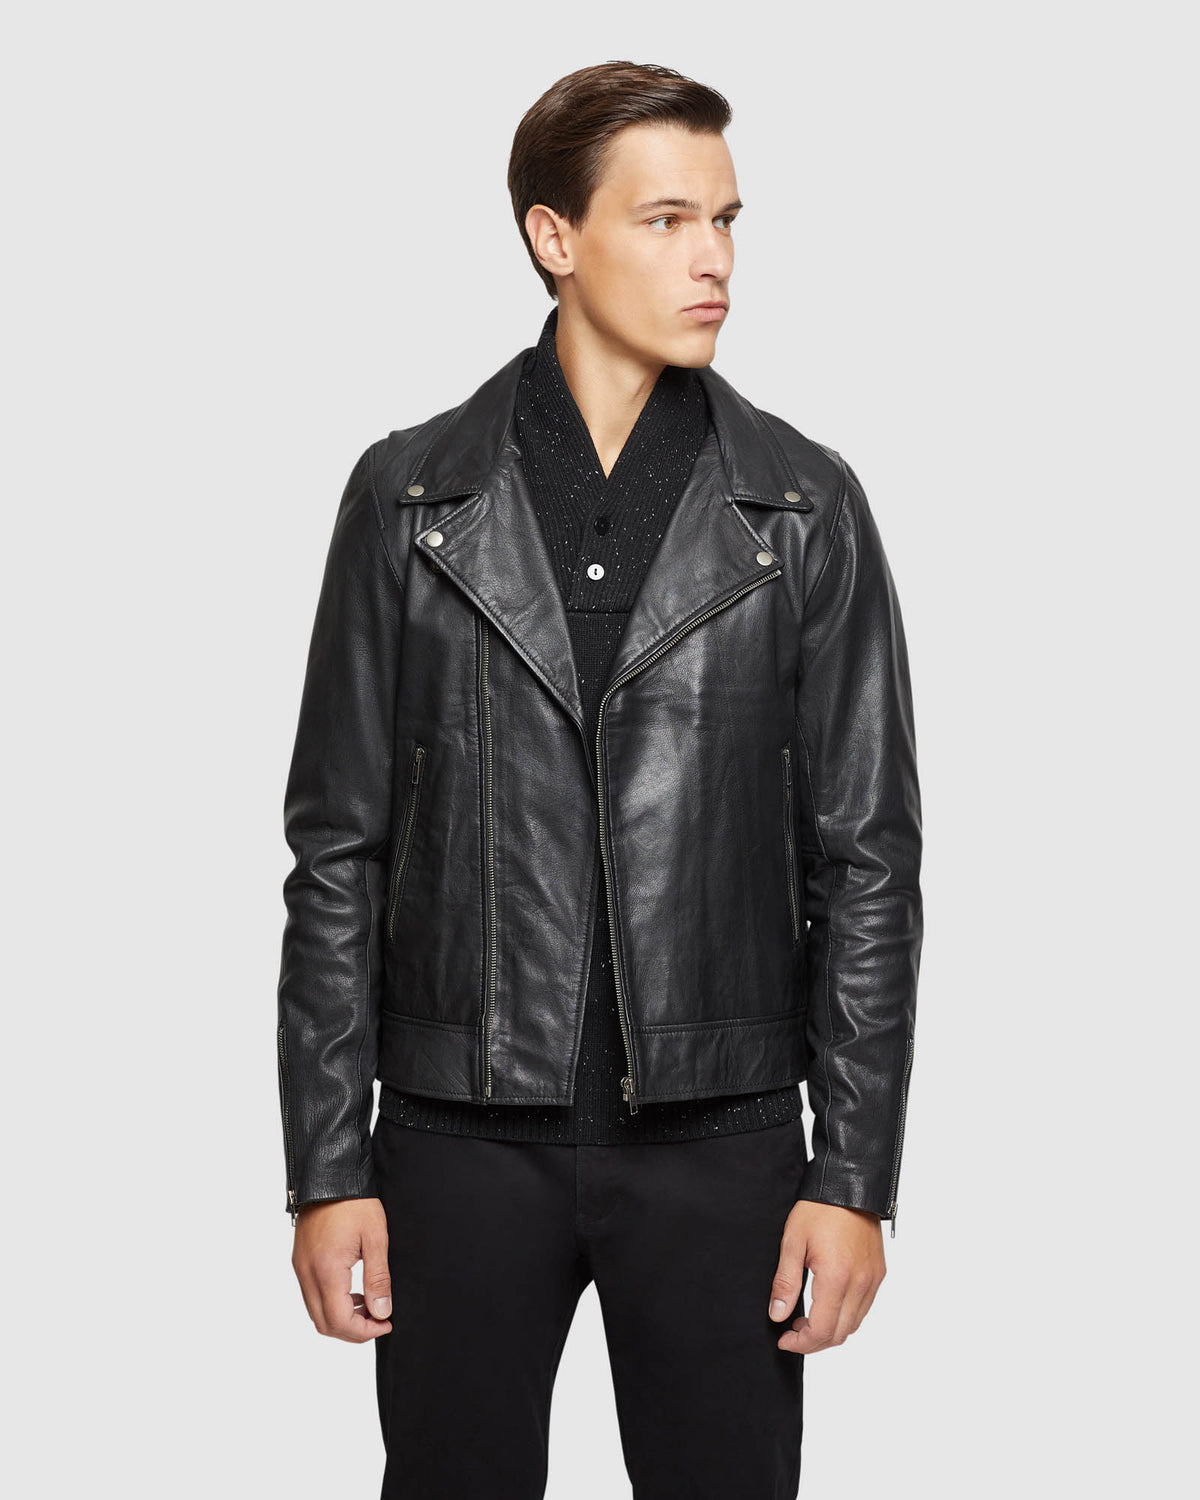 LUCCA GOAT LEATHER BIKER JACKET MENS JACKETS AND COATS